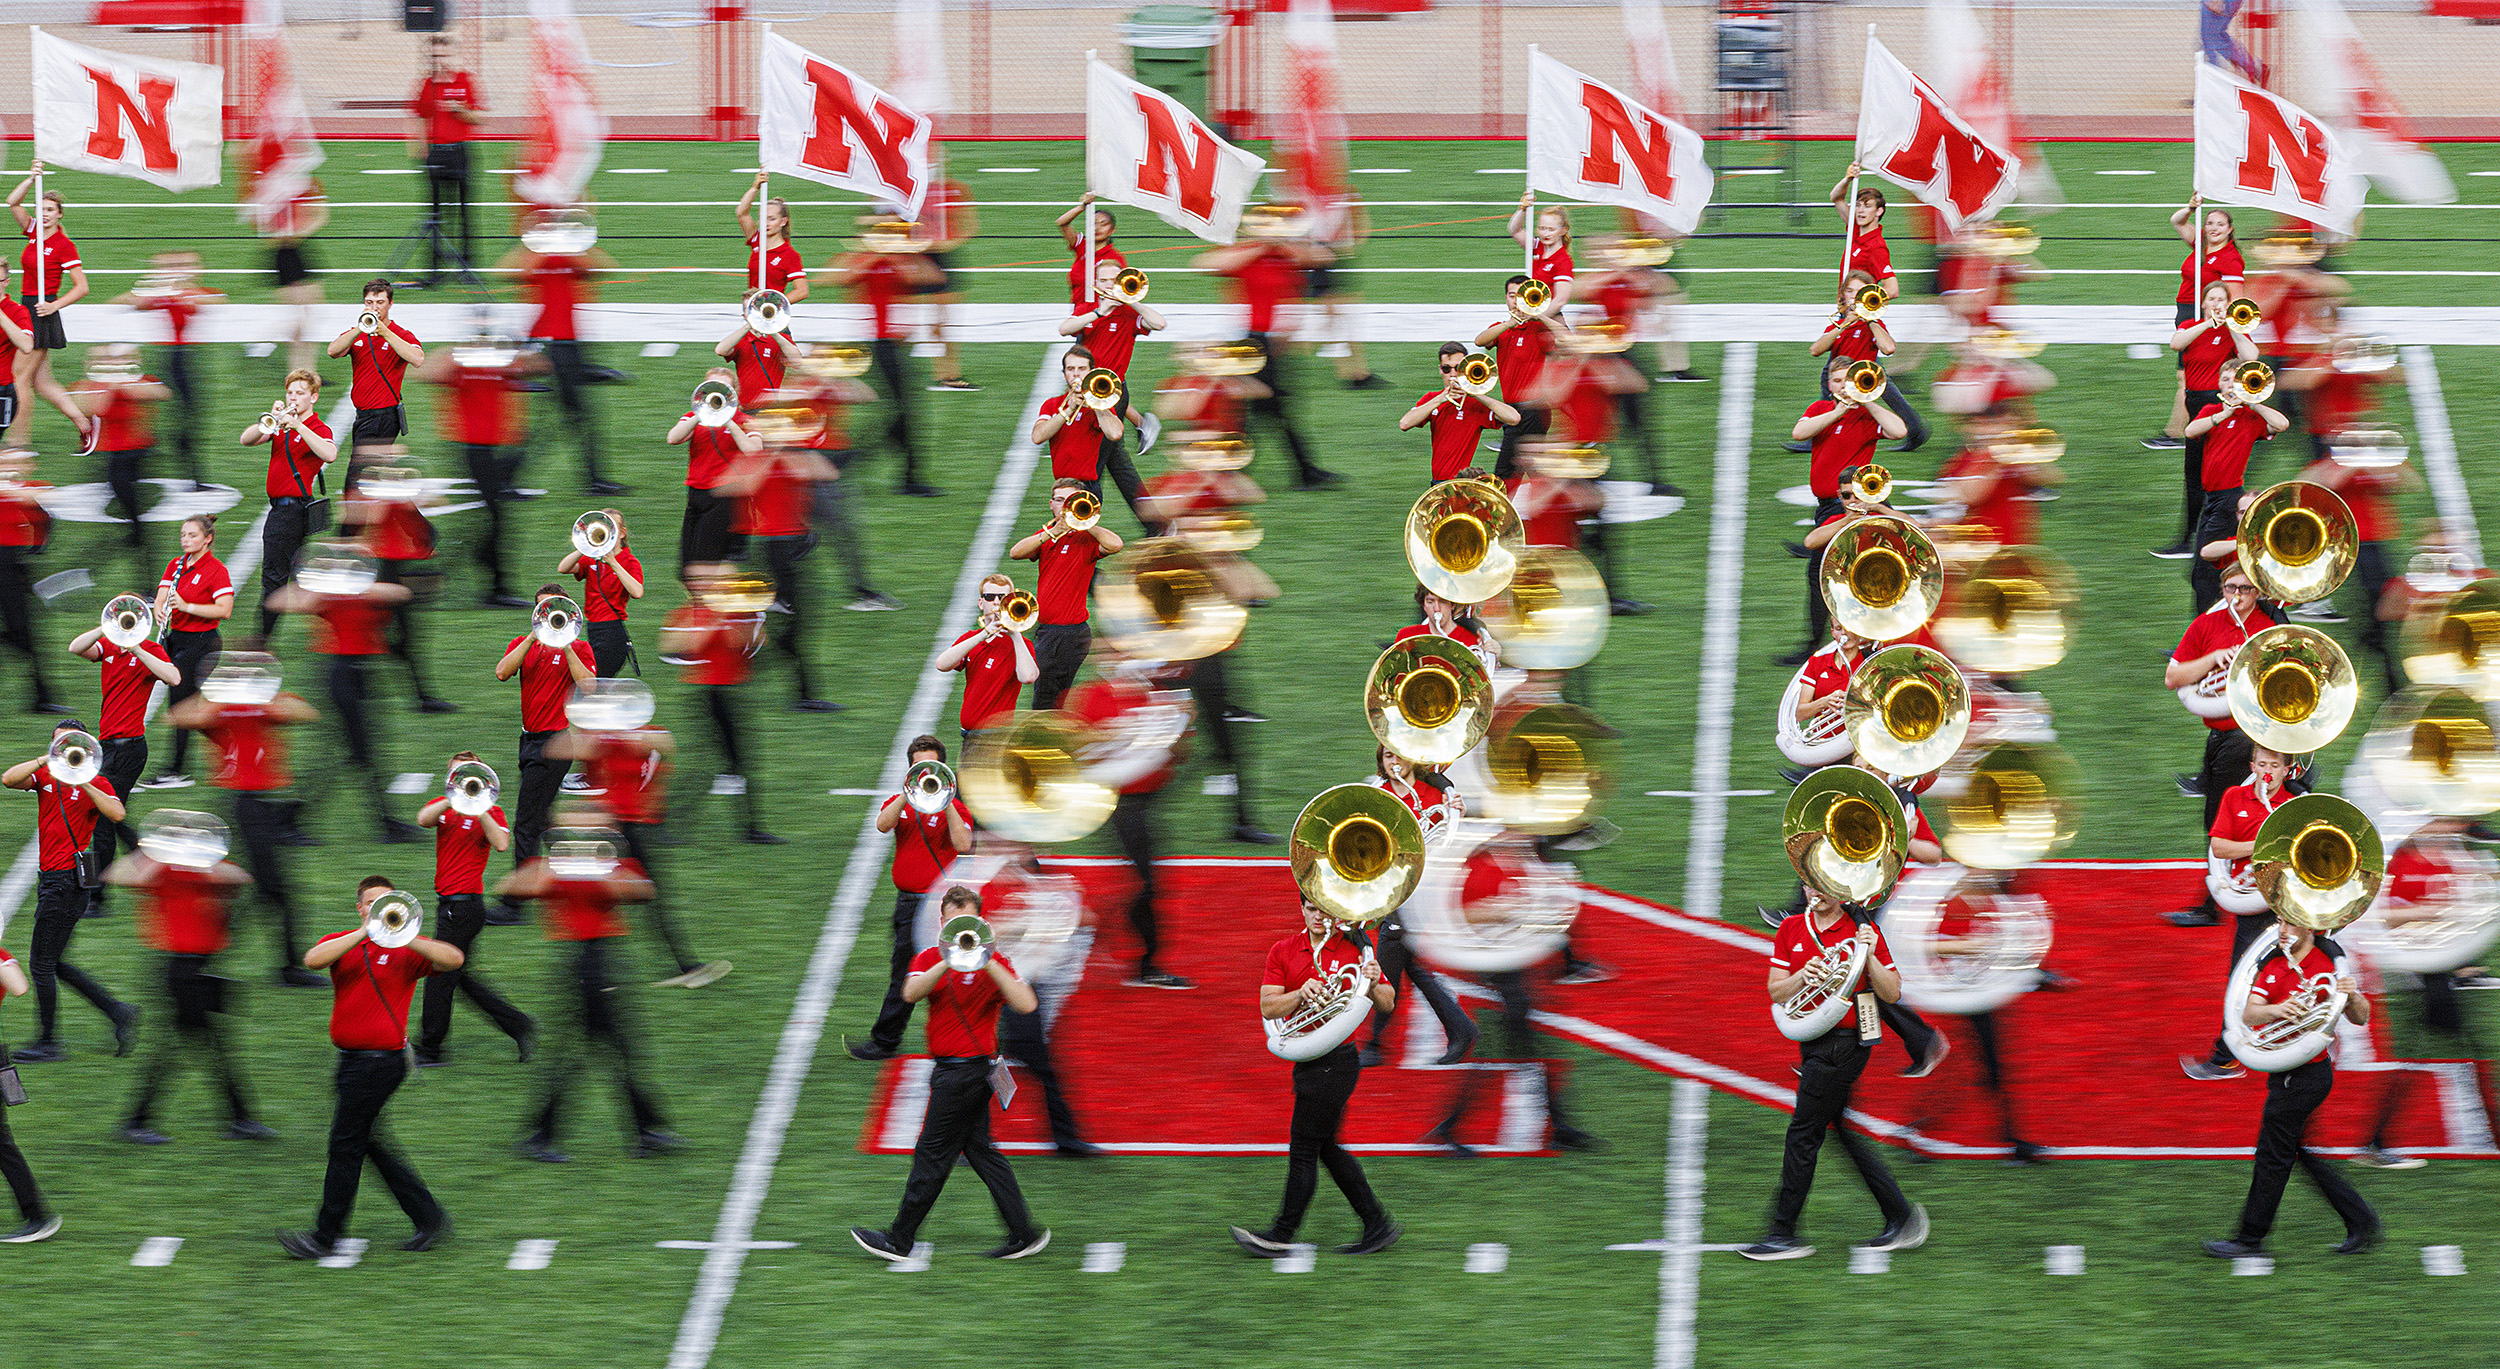 Lines of Cornhusker Marching Band members cross each other on the field at Memorial Stadium